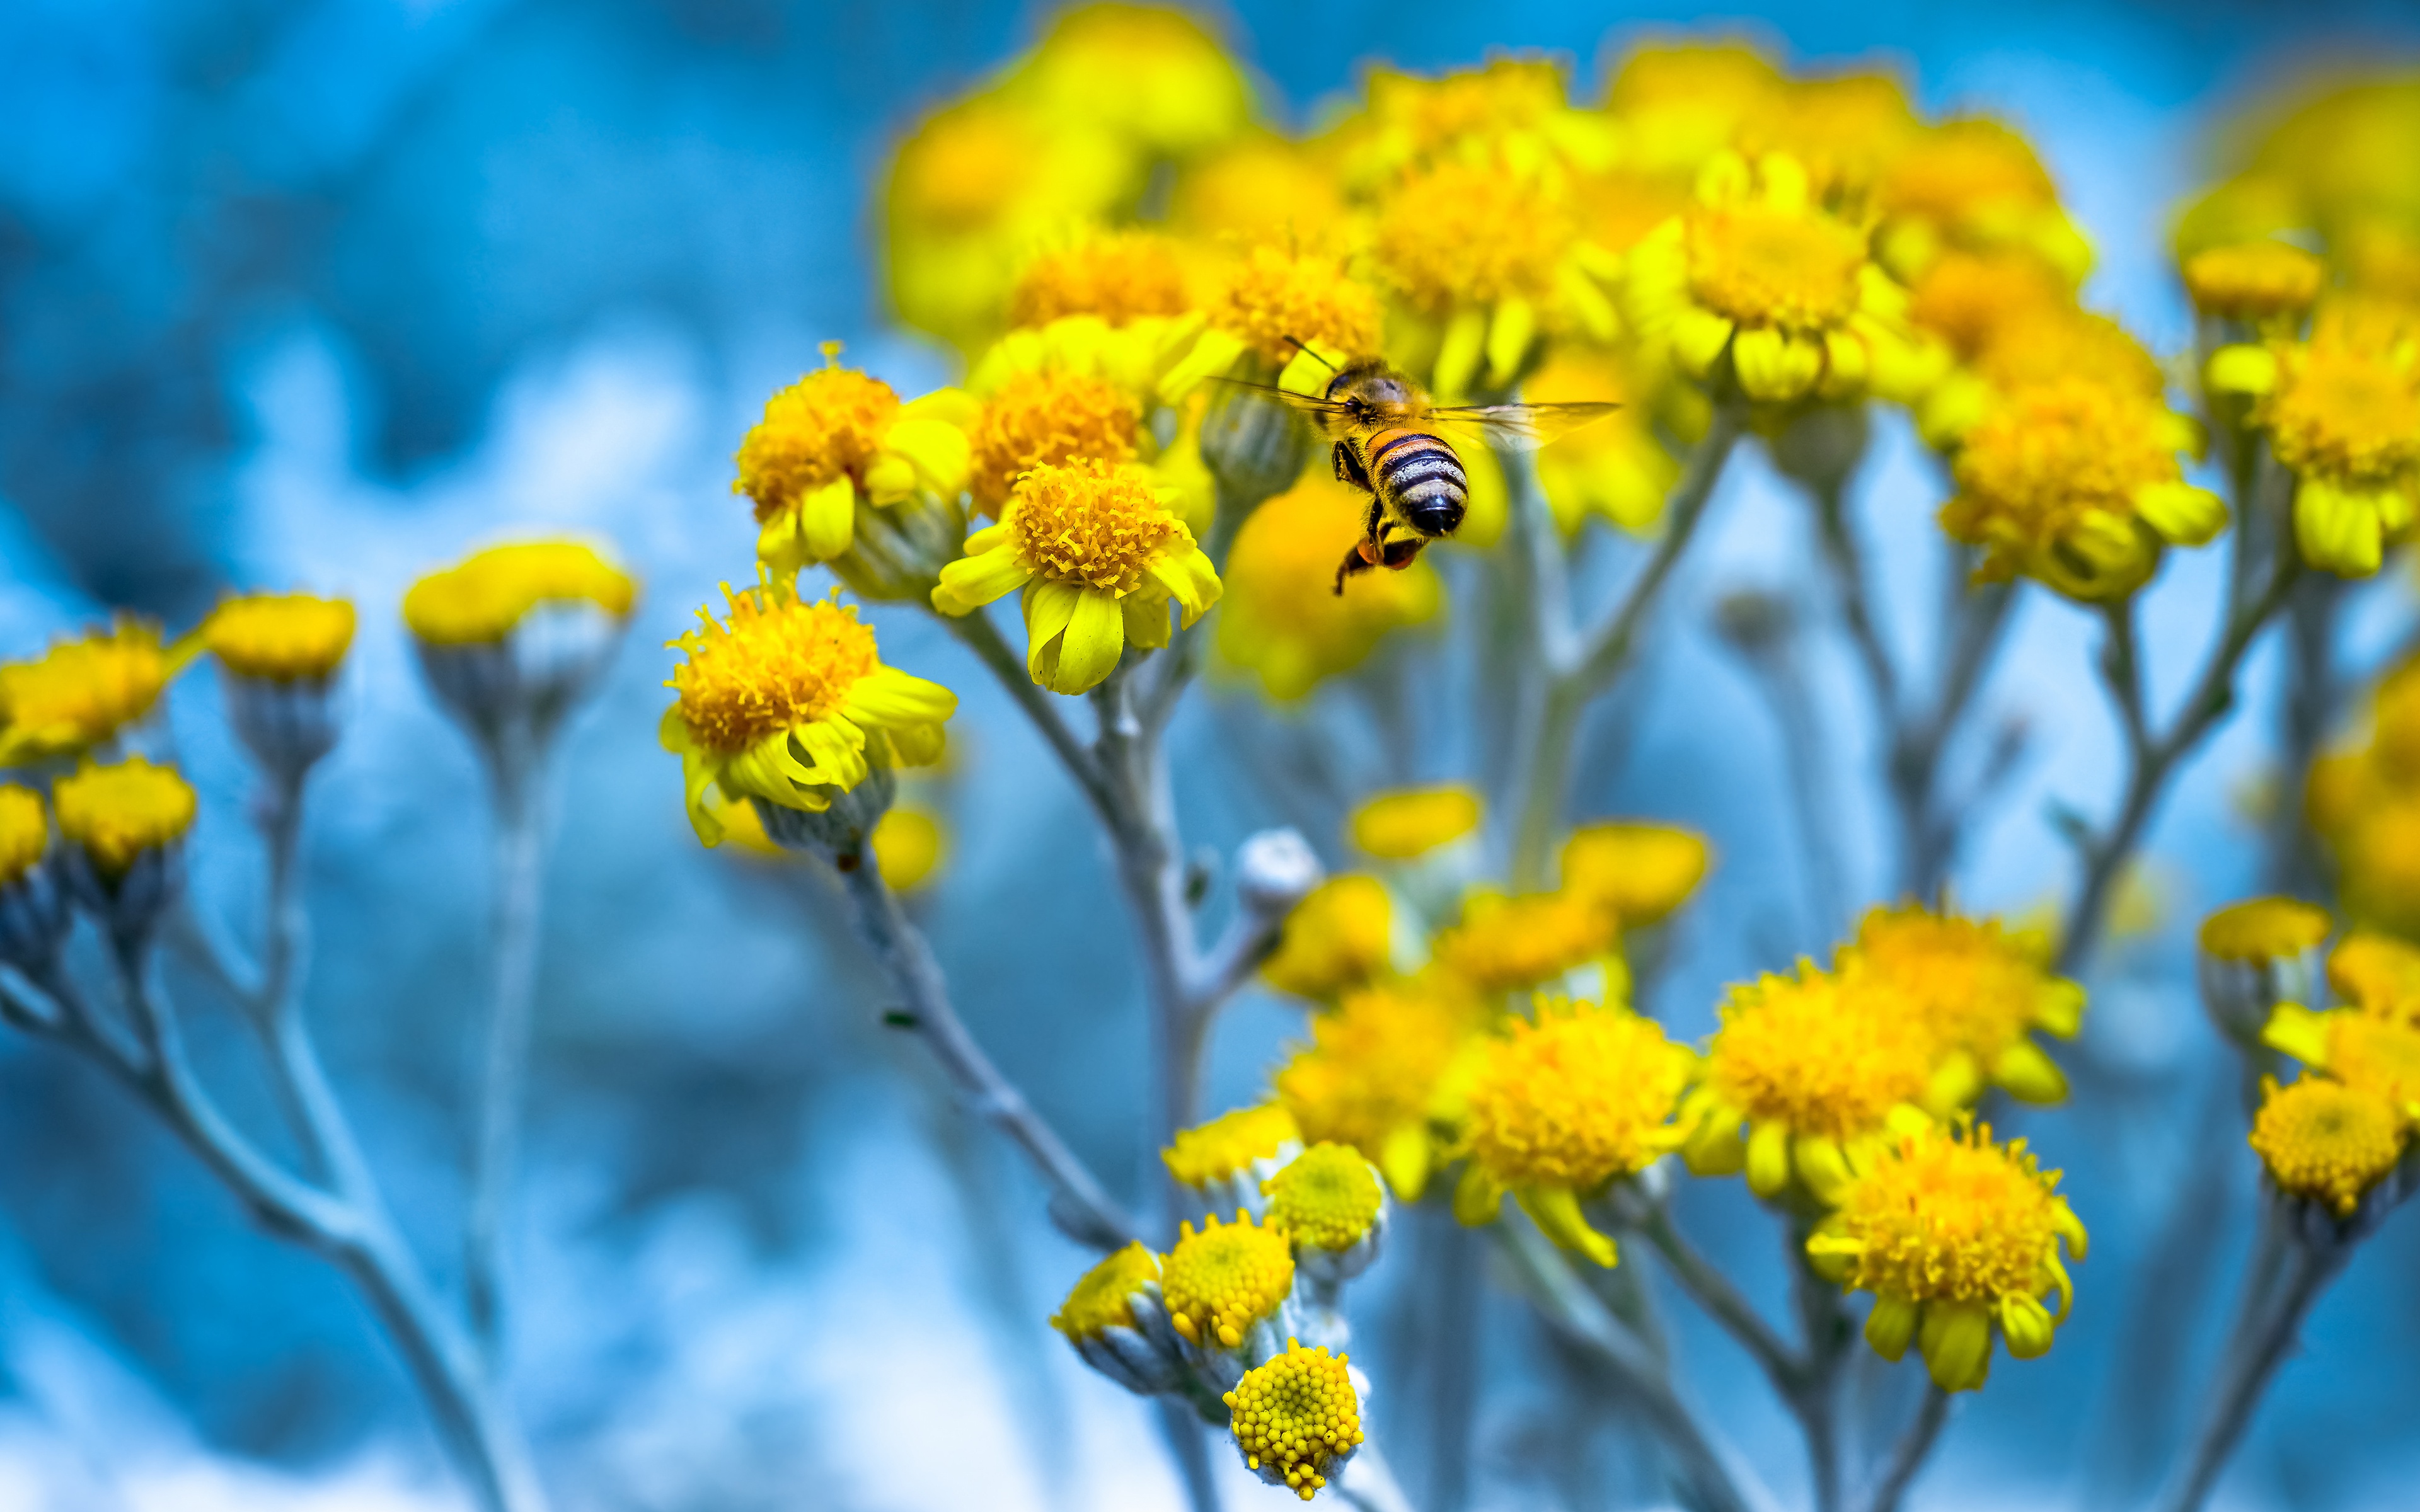 General 3840x2400 colorful flowers insect animals yellow flowers plants bees closeup macro